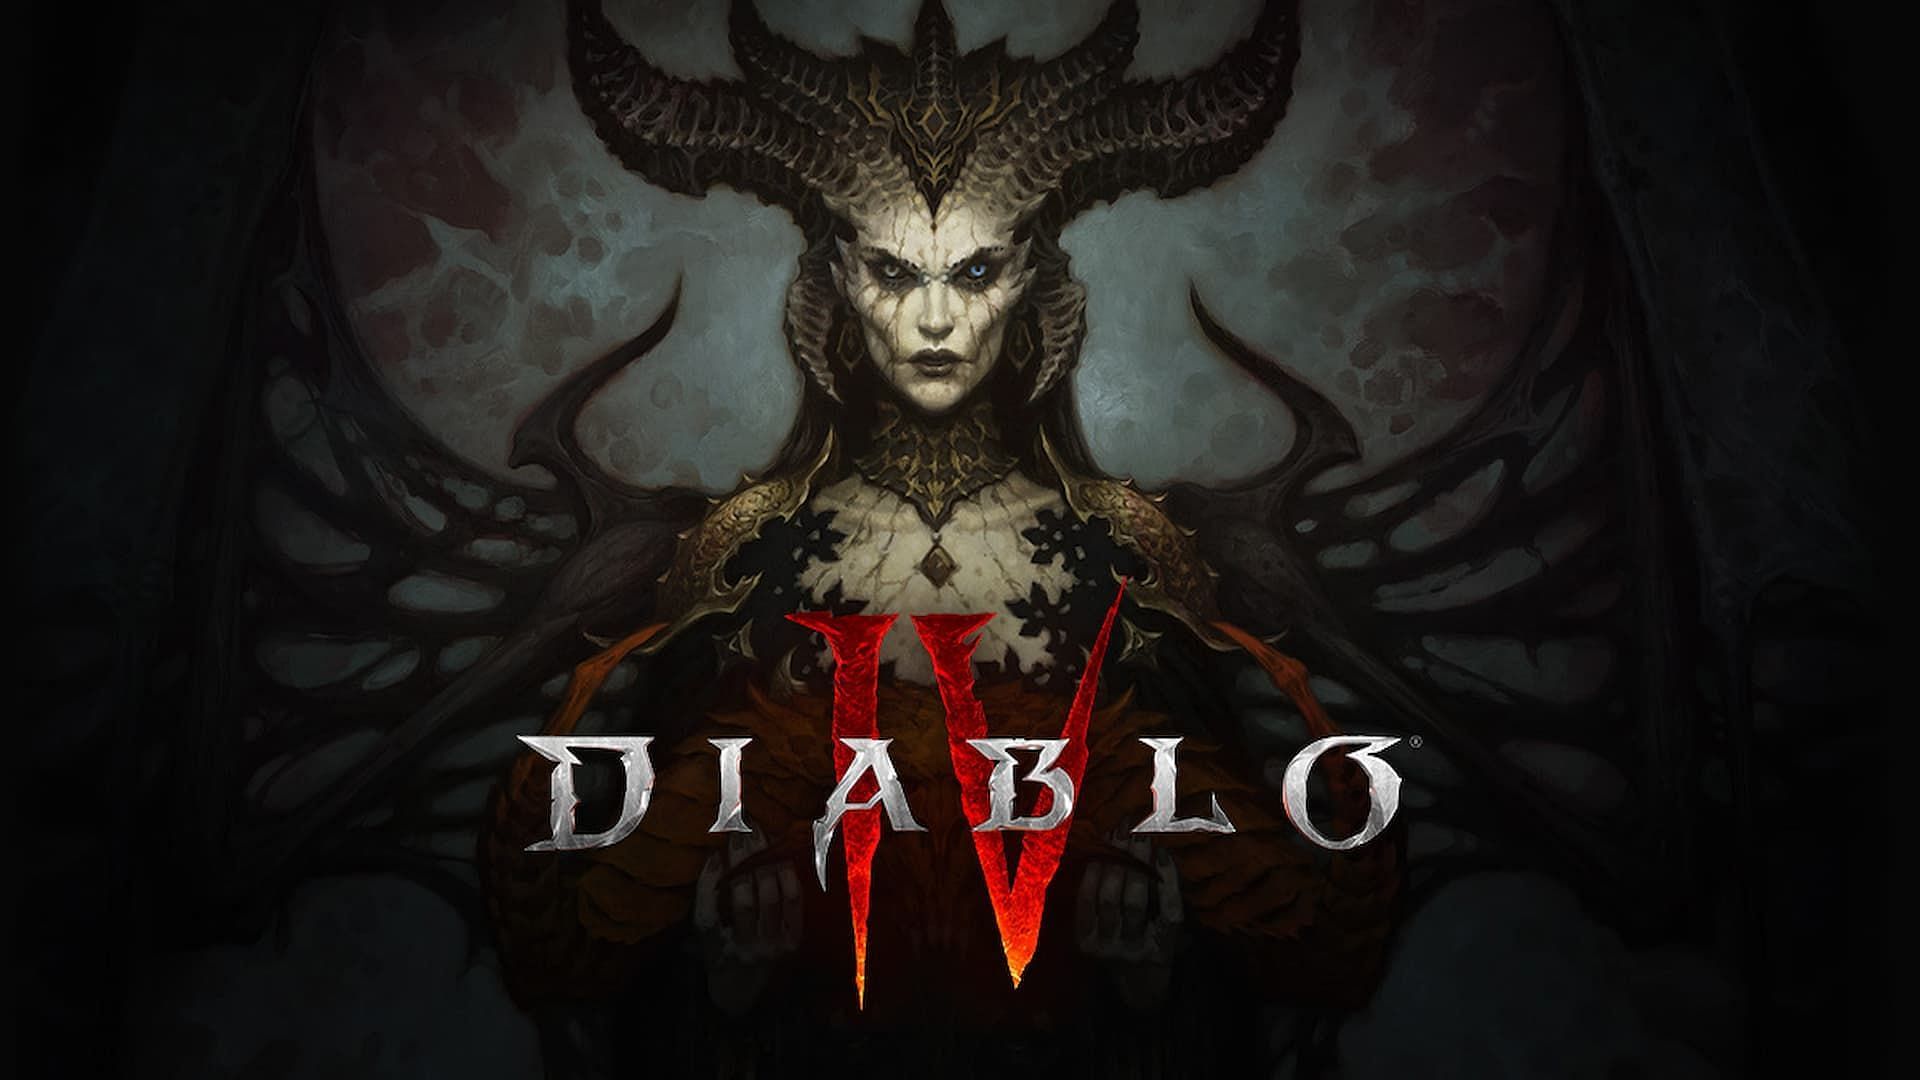 A still from the highly anticipated game, Diablo 4 (image via Blizzard) 